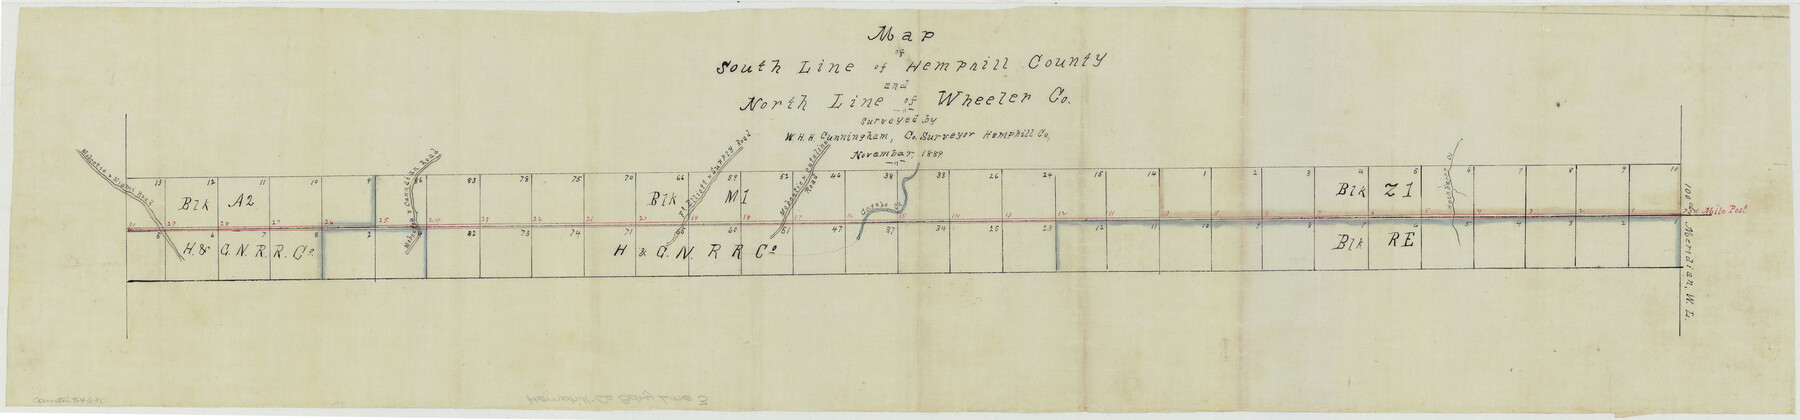 54630, Hemphill County Boundary File 3, General Map Collection